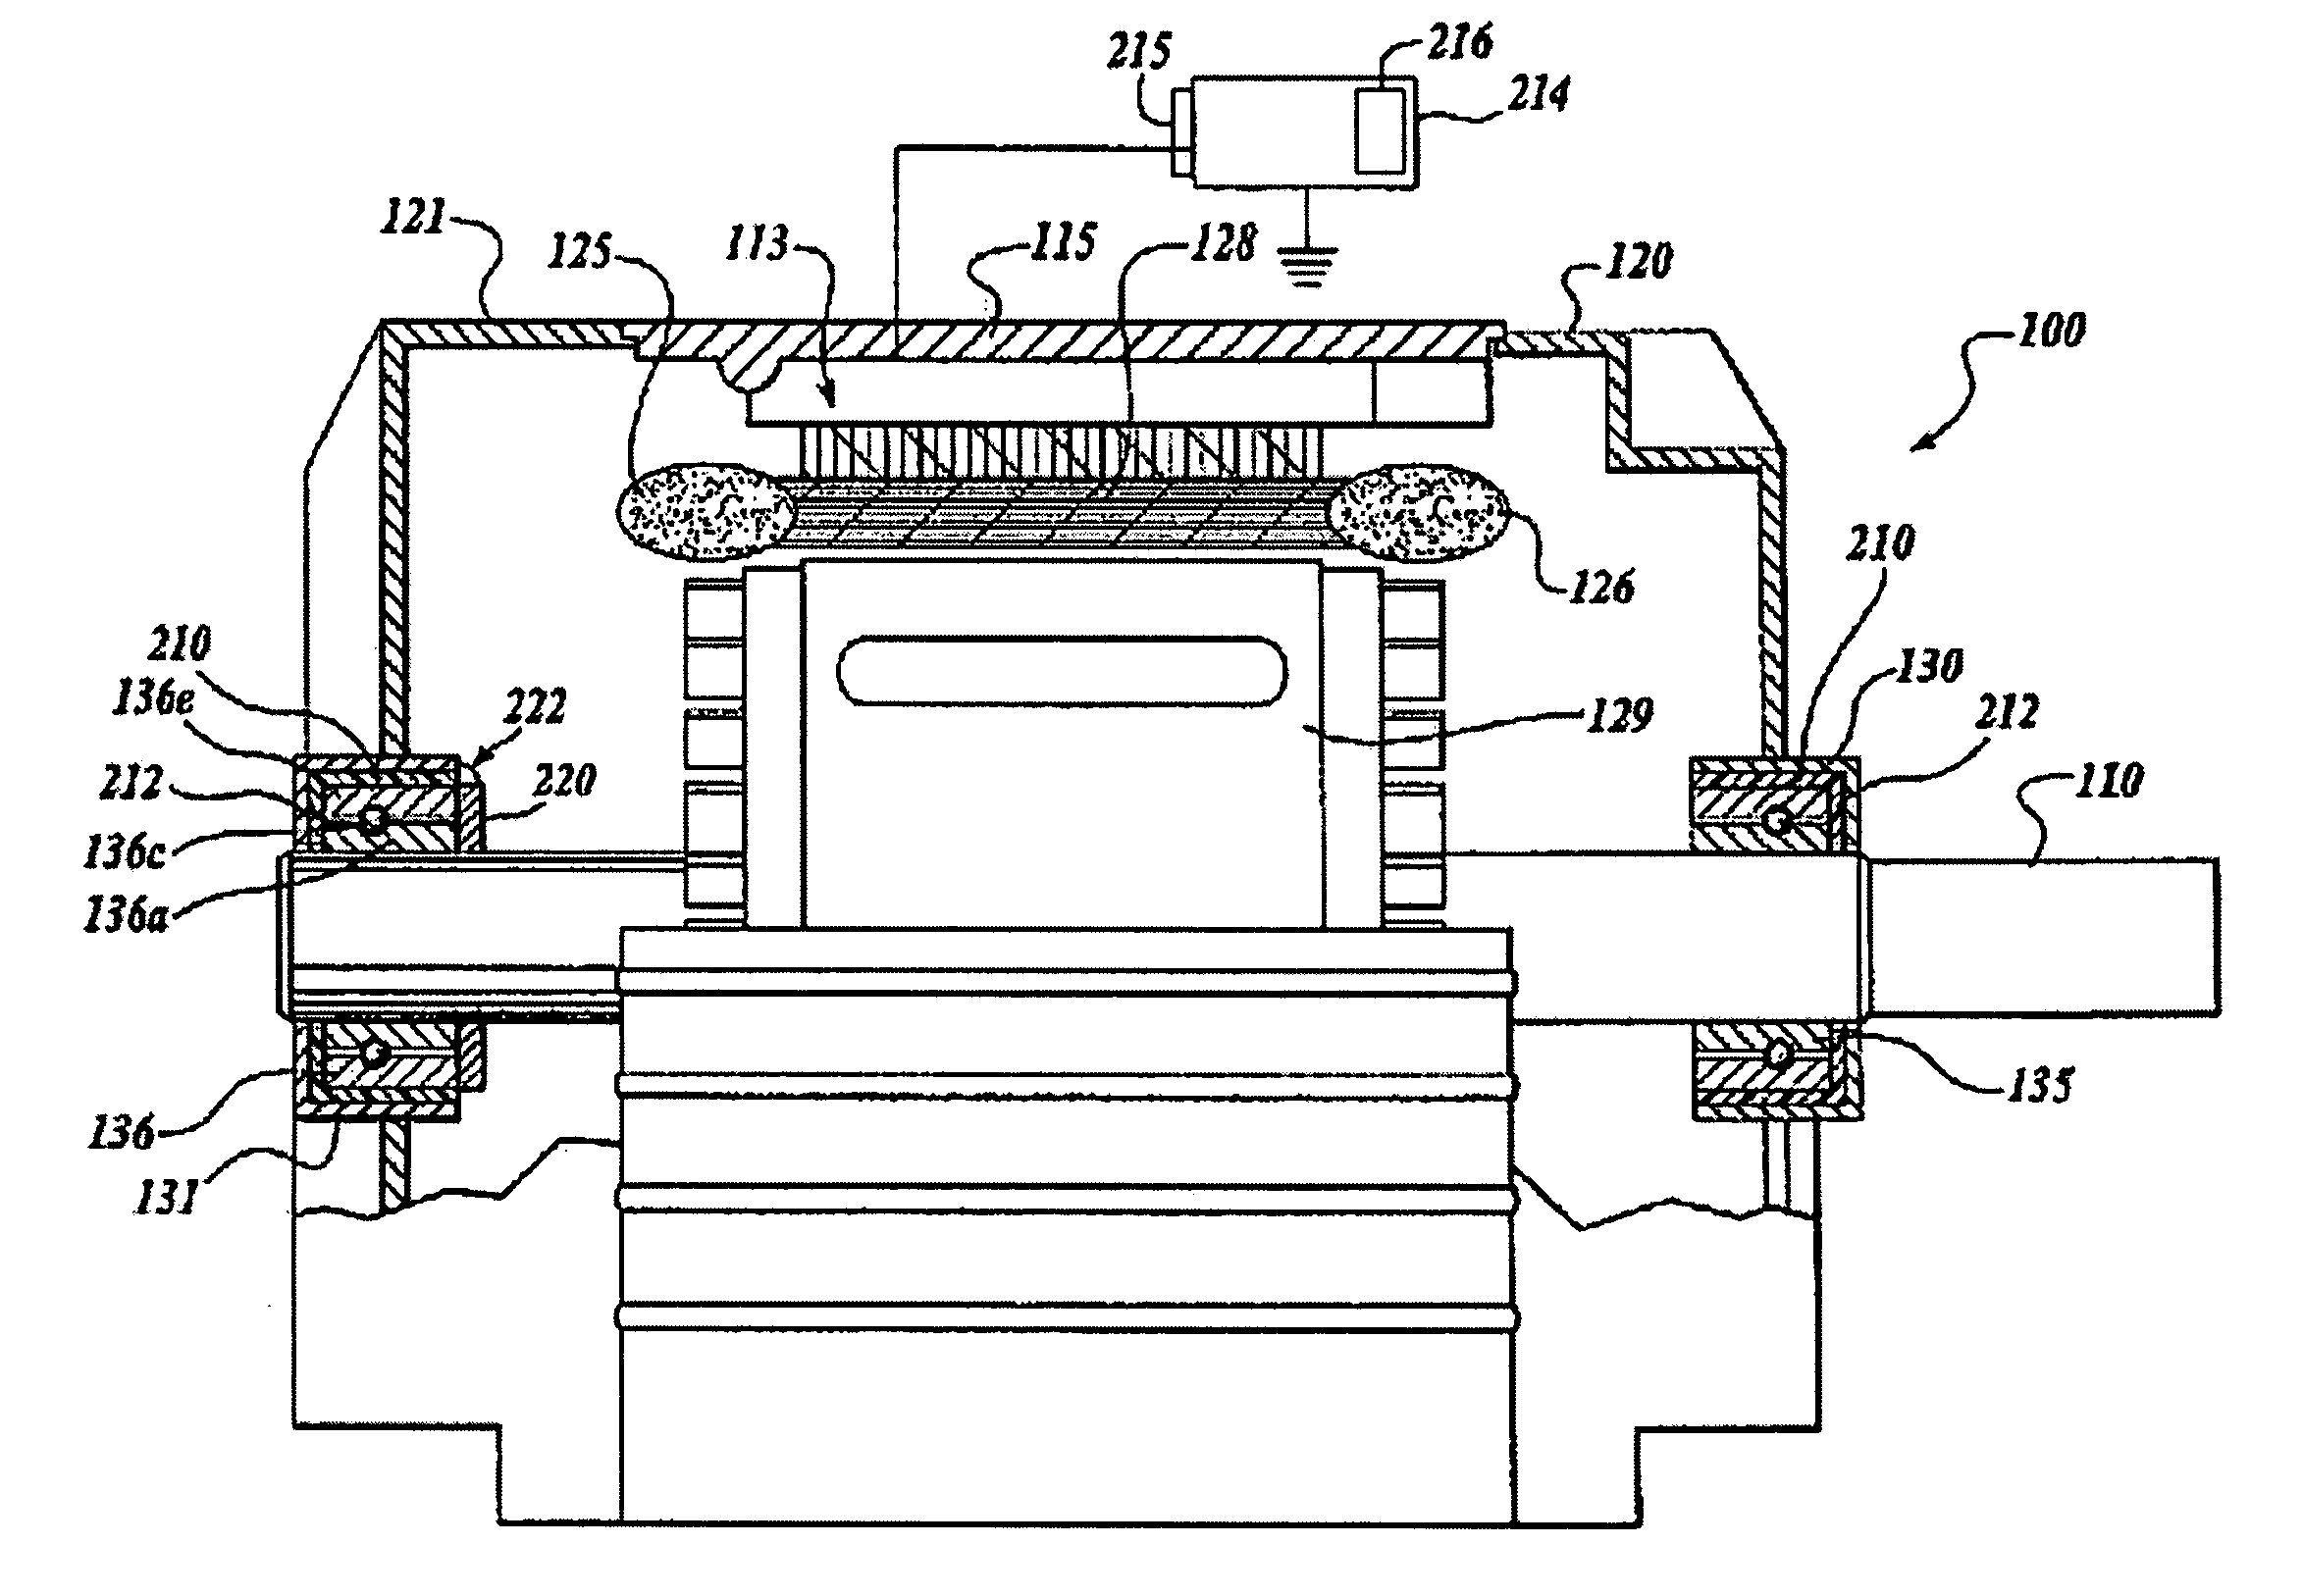 Method and system for reducing bearing fluting in electromechanical machine